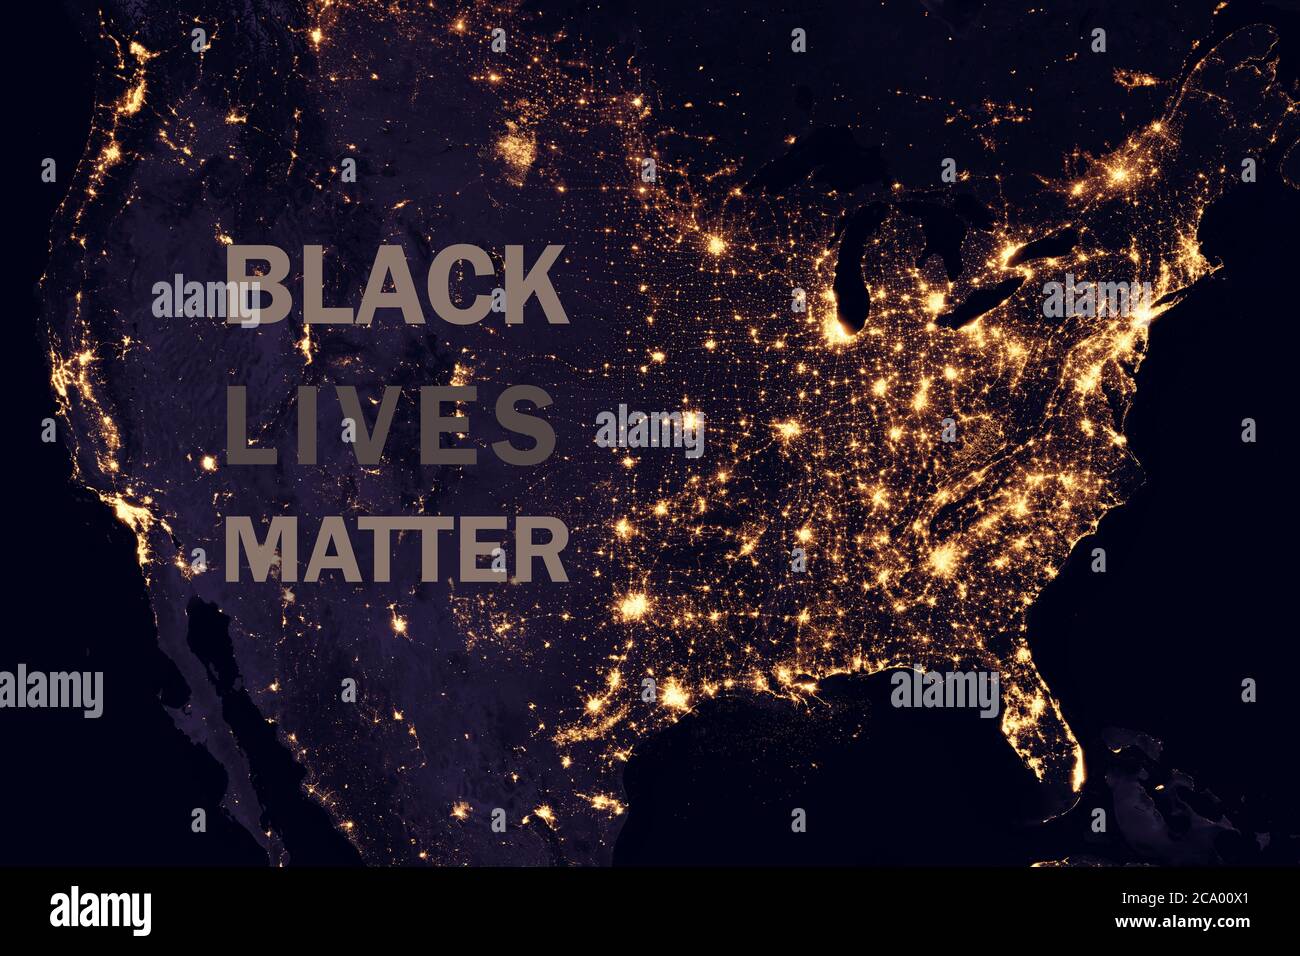 Black Lives Matter slogan on US night map, global satellite photo. Protest marches and riots against police violence, civil rights movement. Elements Stock Photo